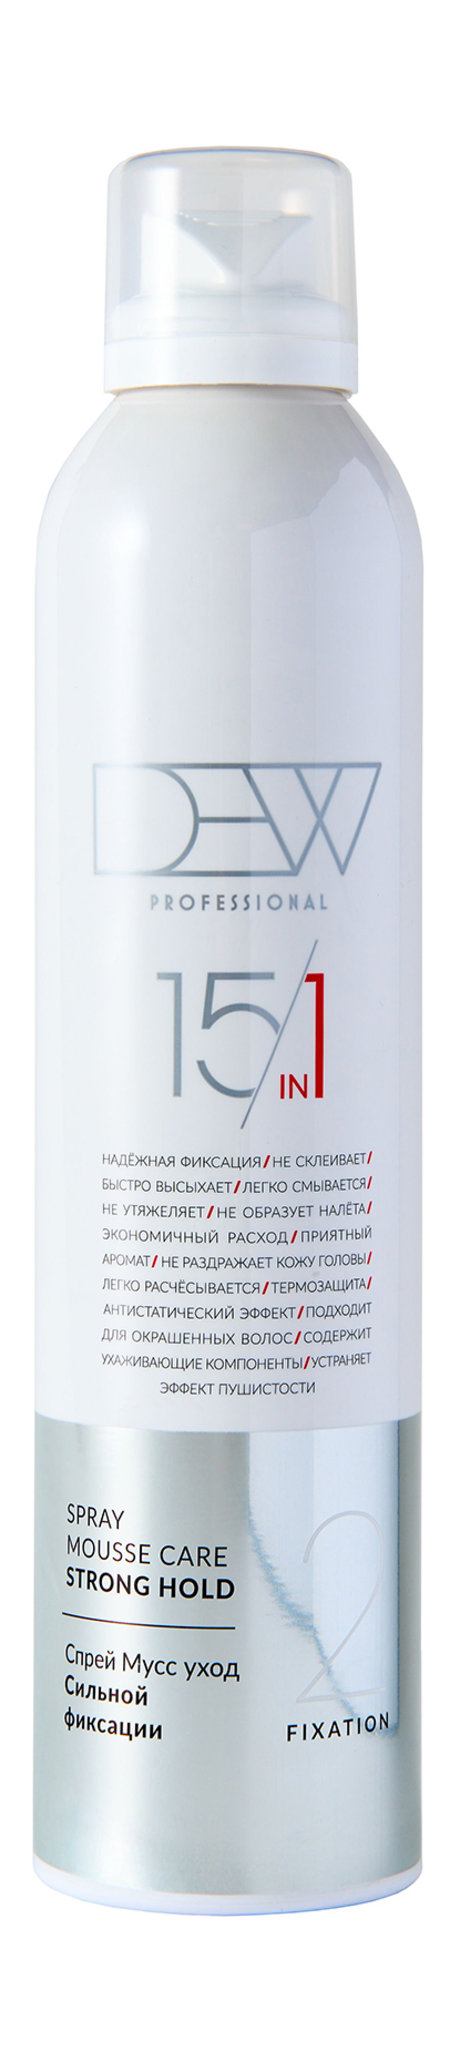 dew professional 15 in 1 strong hold mousse care spray fixation 2